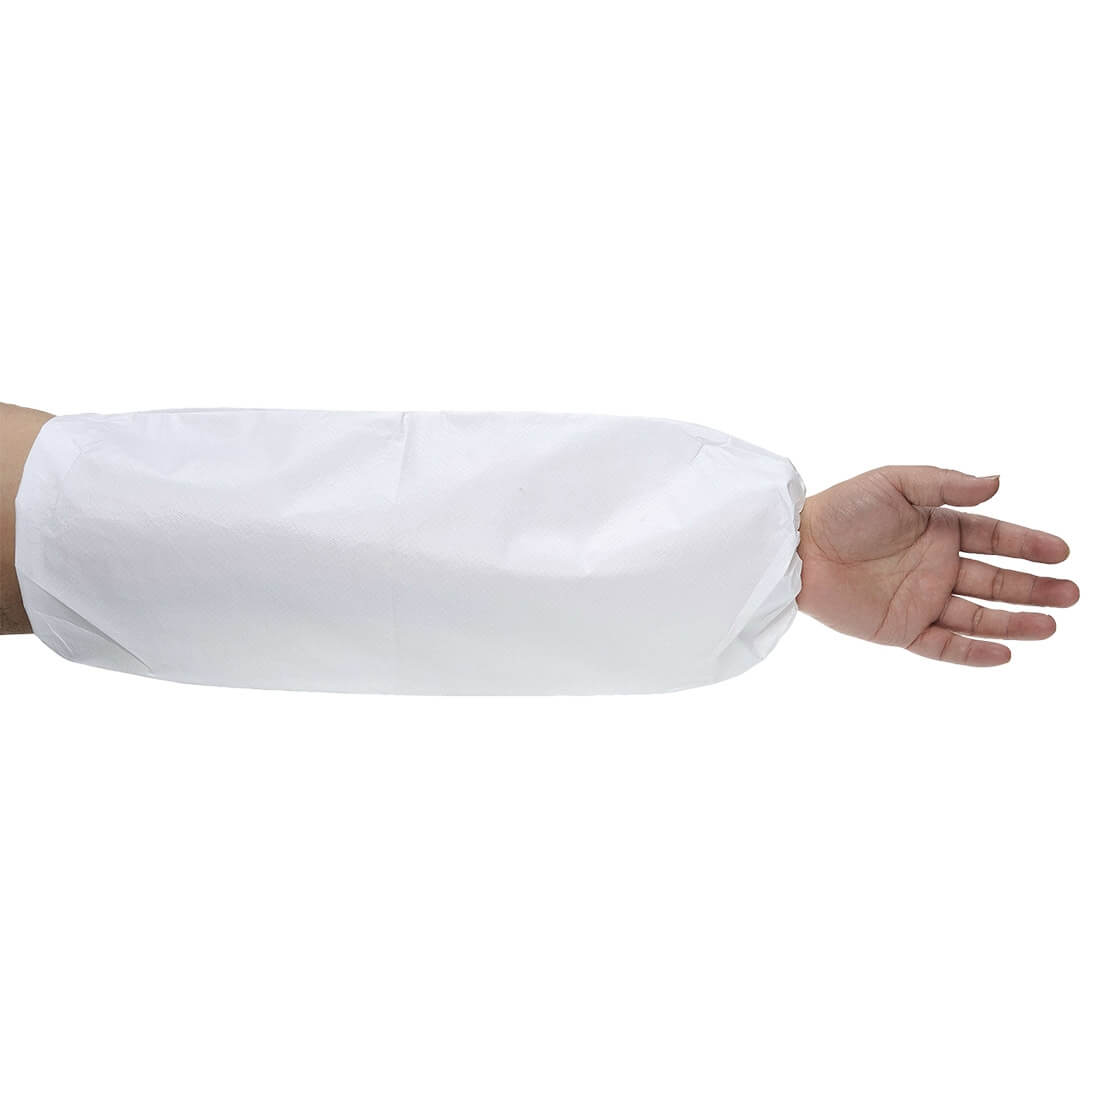 BizTex® Microporous Sleeve Cover Type 6PB - Personal protection